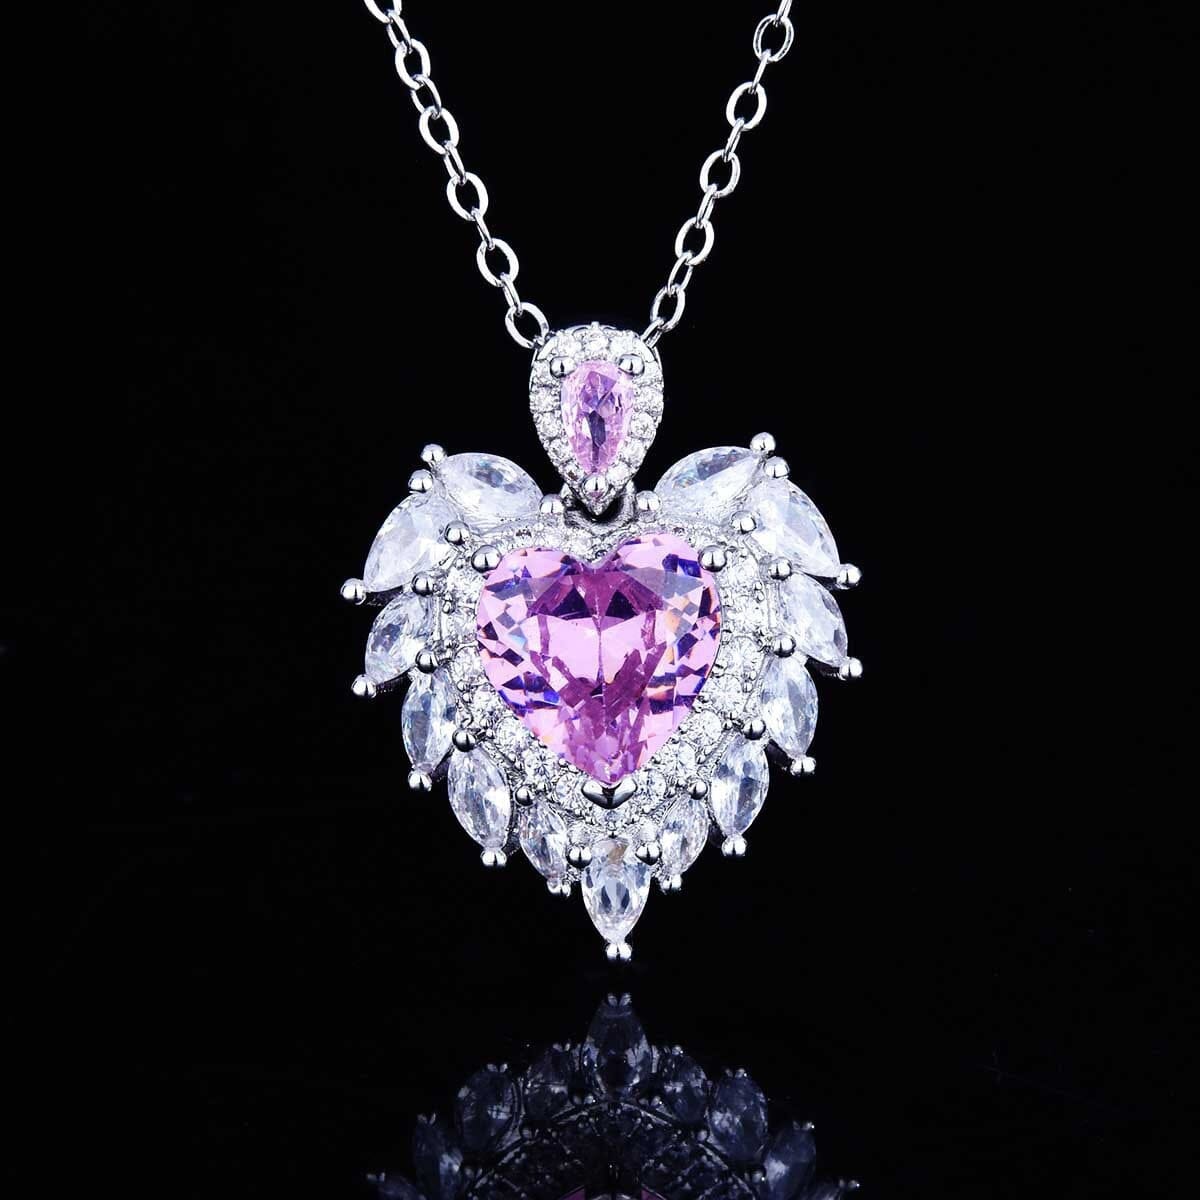 Luxury Temperament Design Angel Wing Simulated Aquamarine/ Amethyst Heart Necklace - 925 Sterling SilverNecklaceA